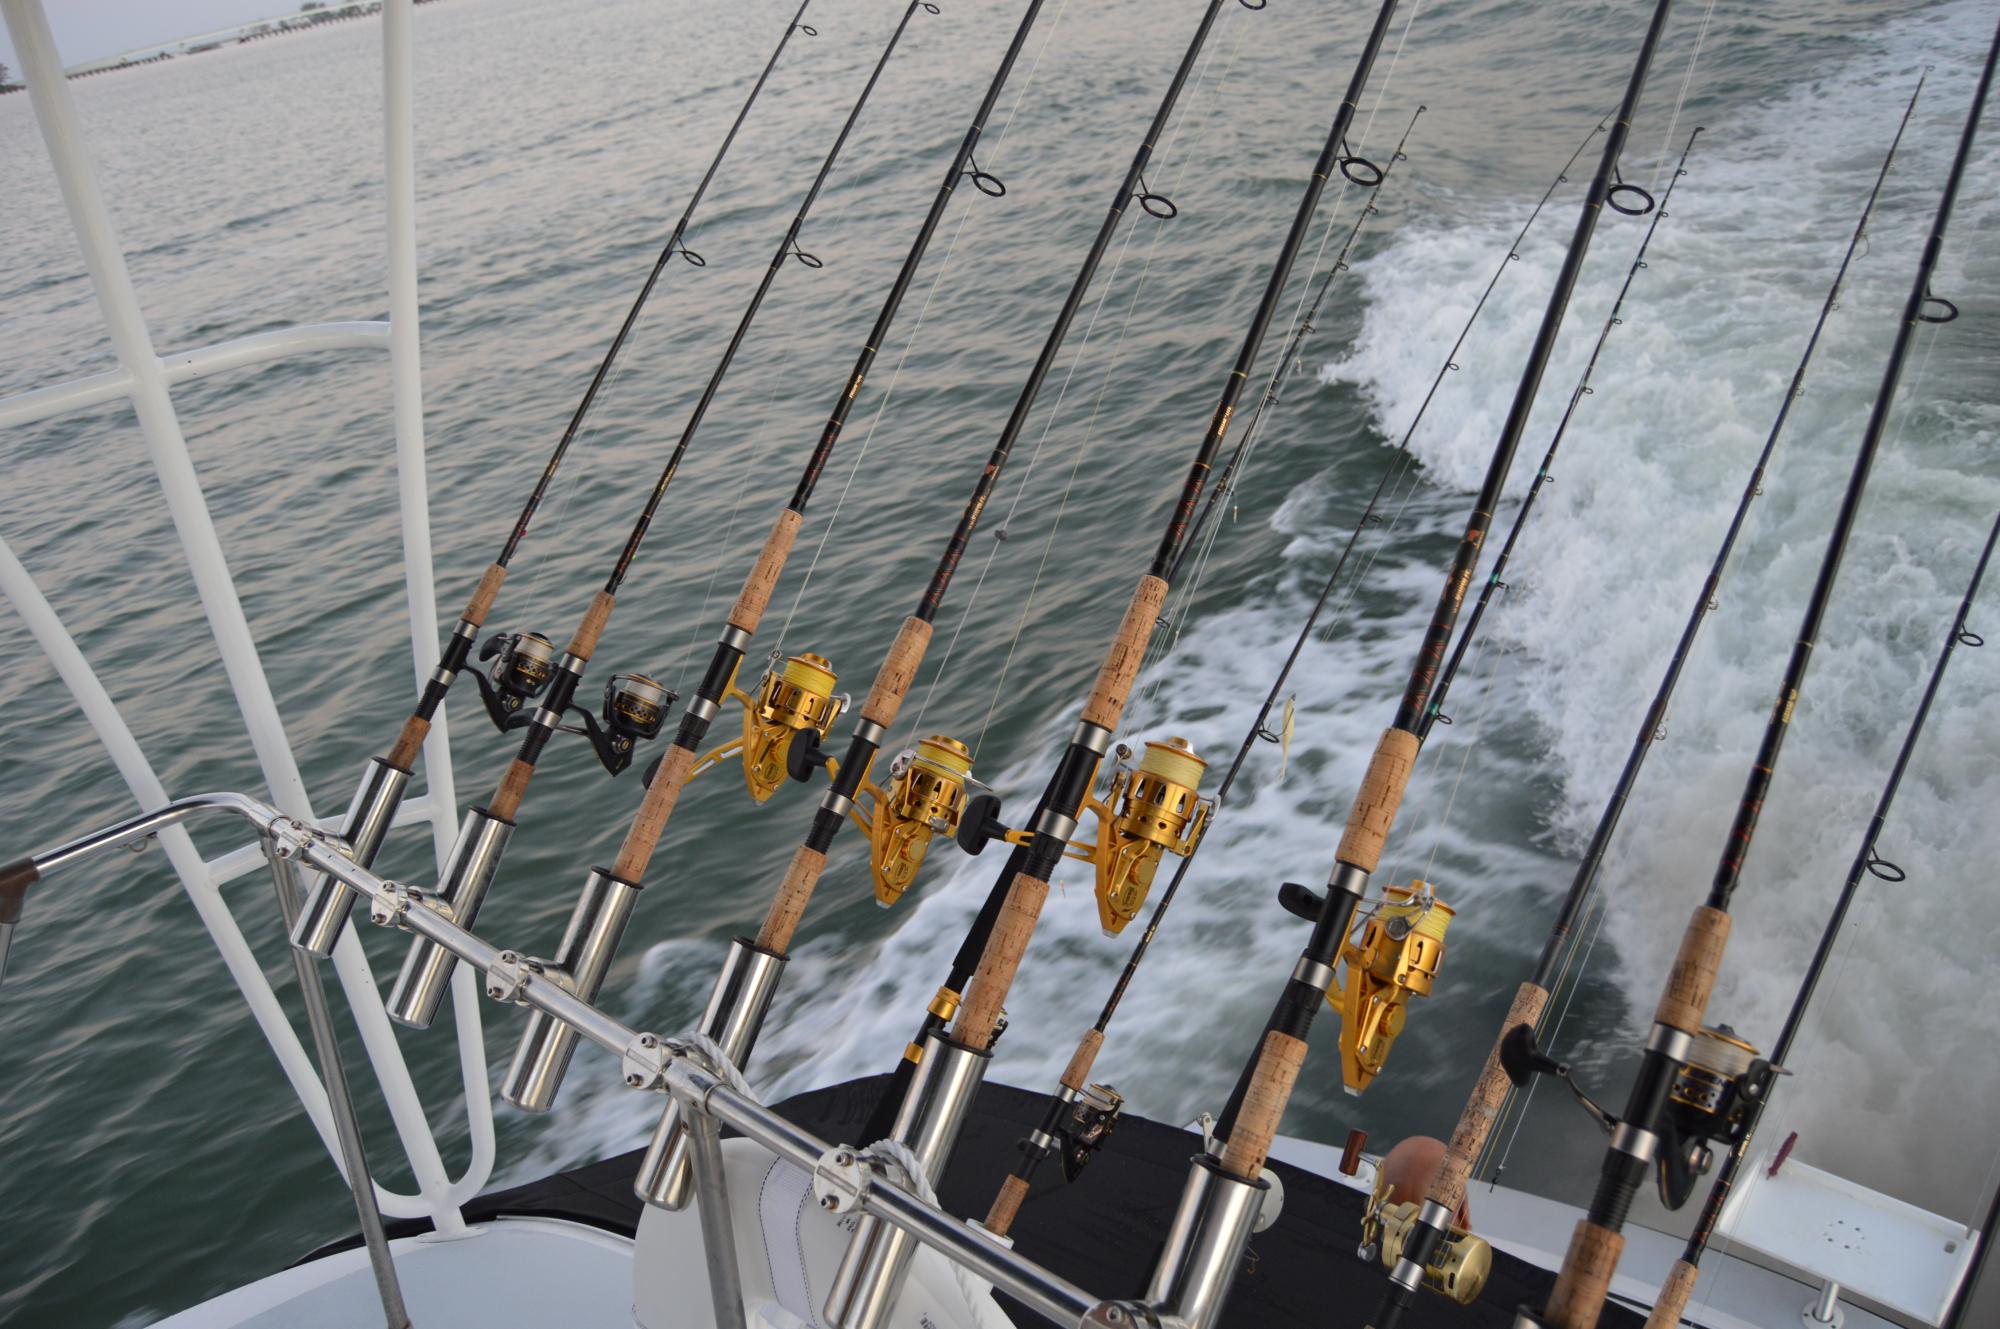 Reel Action Charters